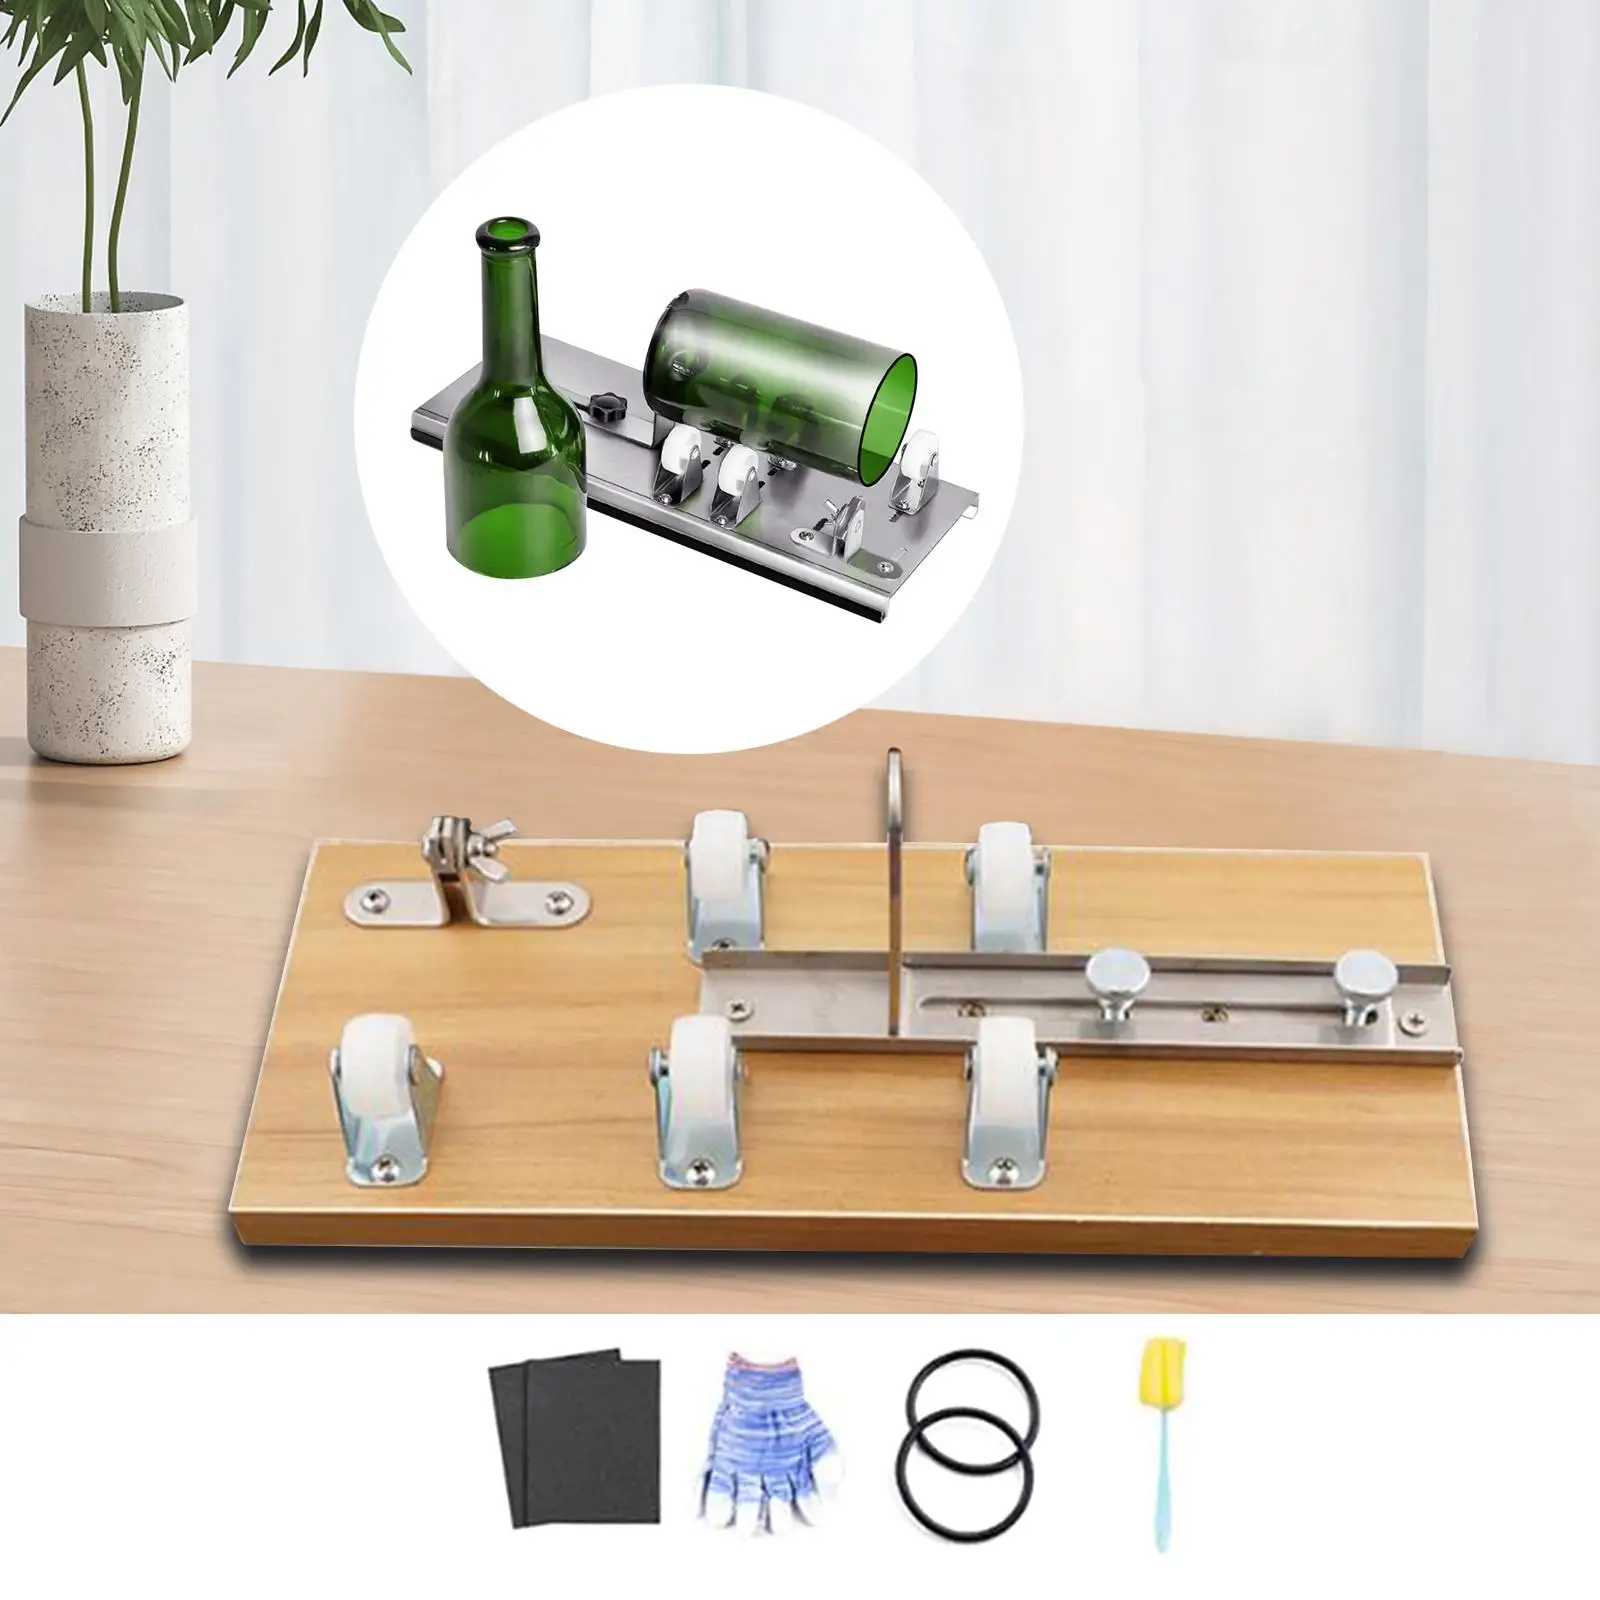 Glass Bottle Cutter Durable Stainless Steel Kitchen Multipurpose Cutting Machine Crafts for Making Cup Candle Holders Home Decor